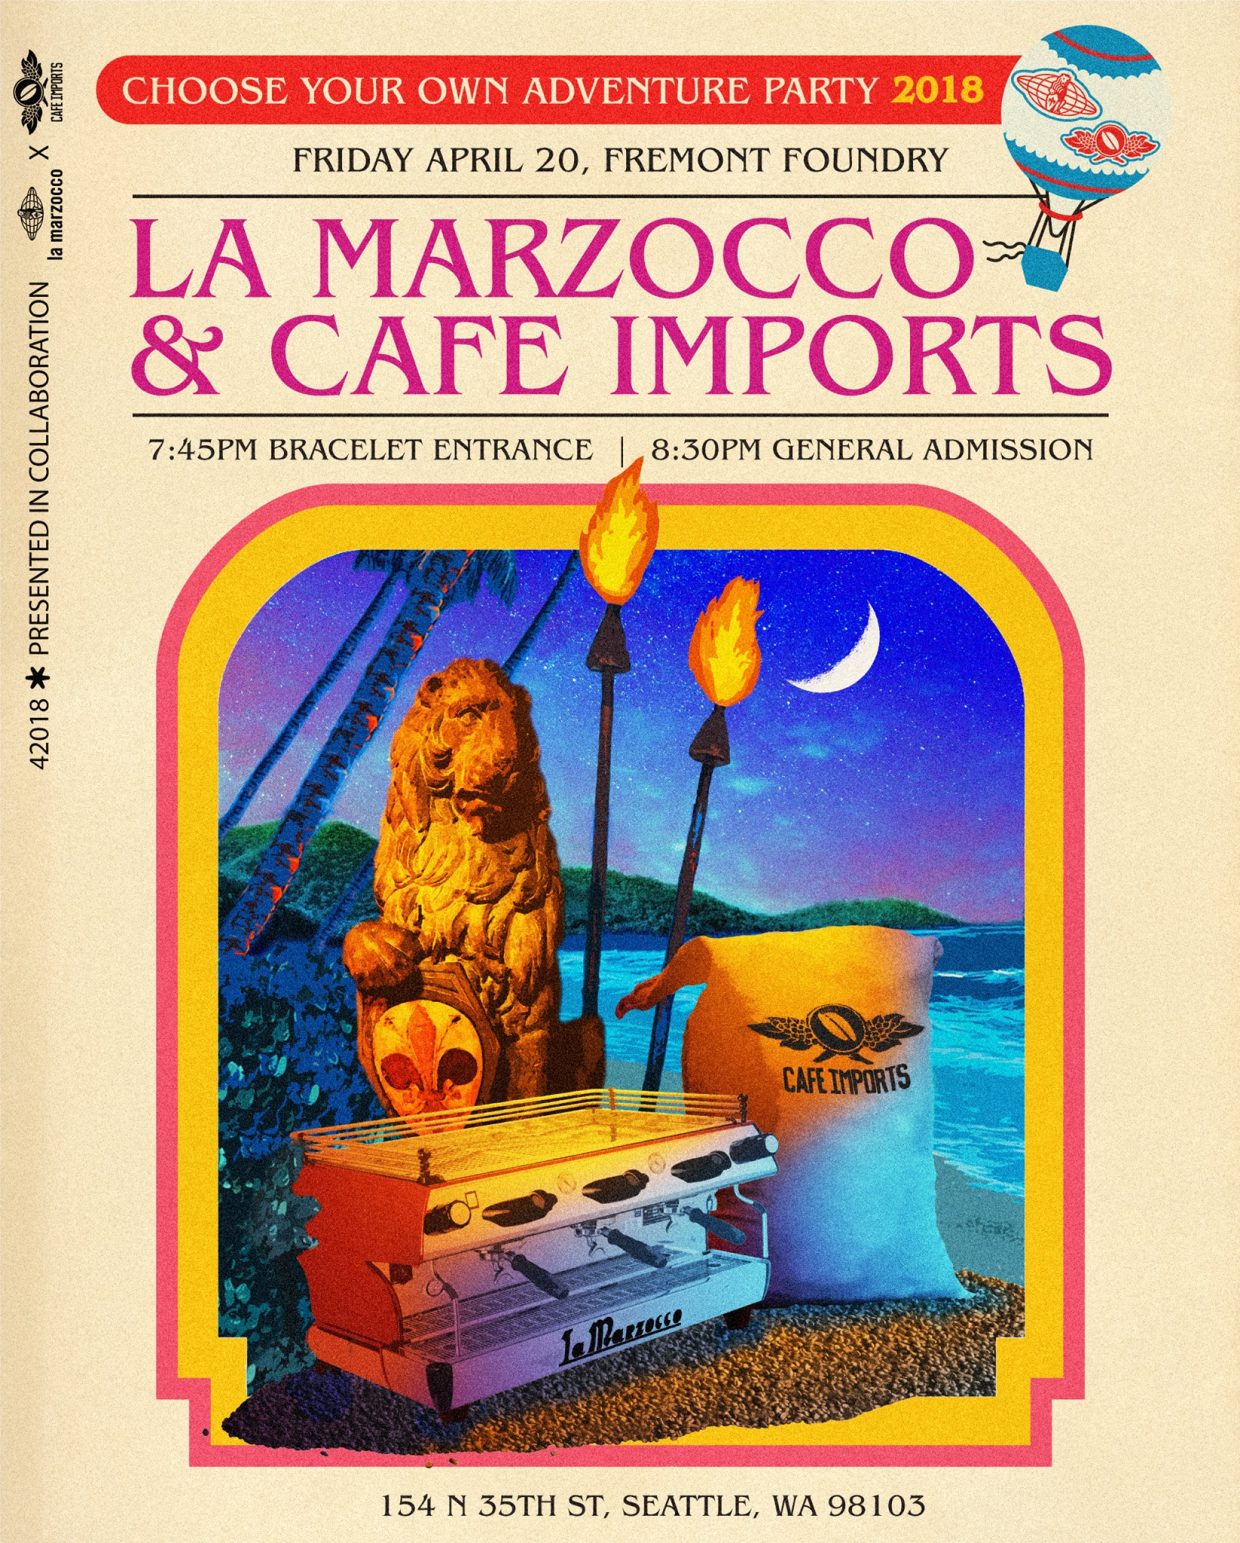 Cafe Imports and La Marzocco